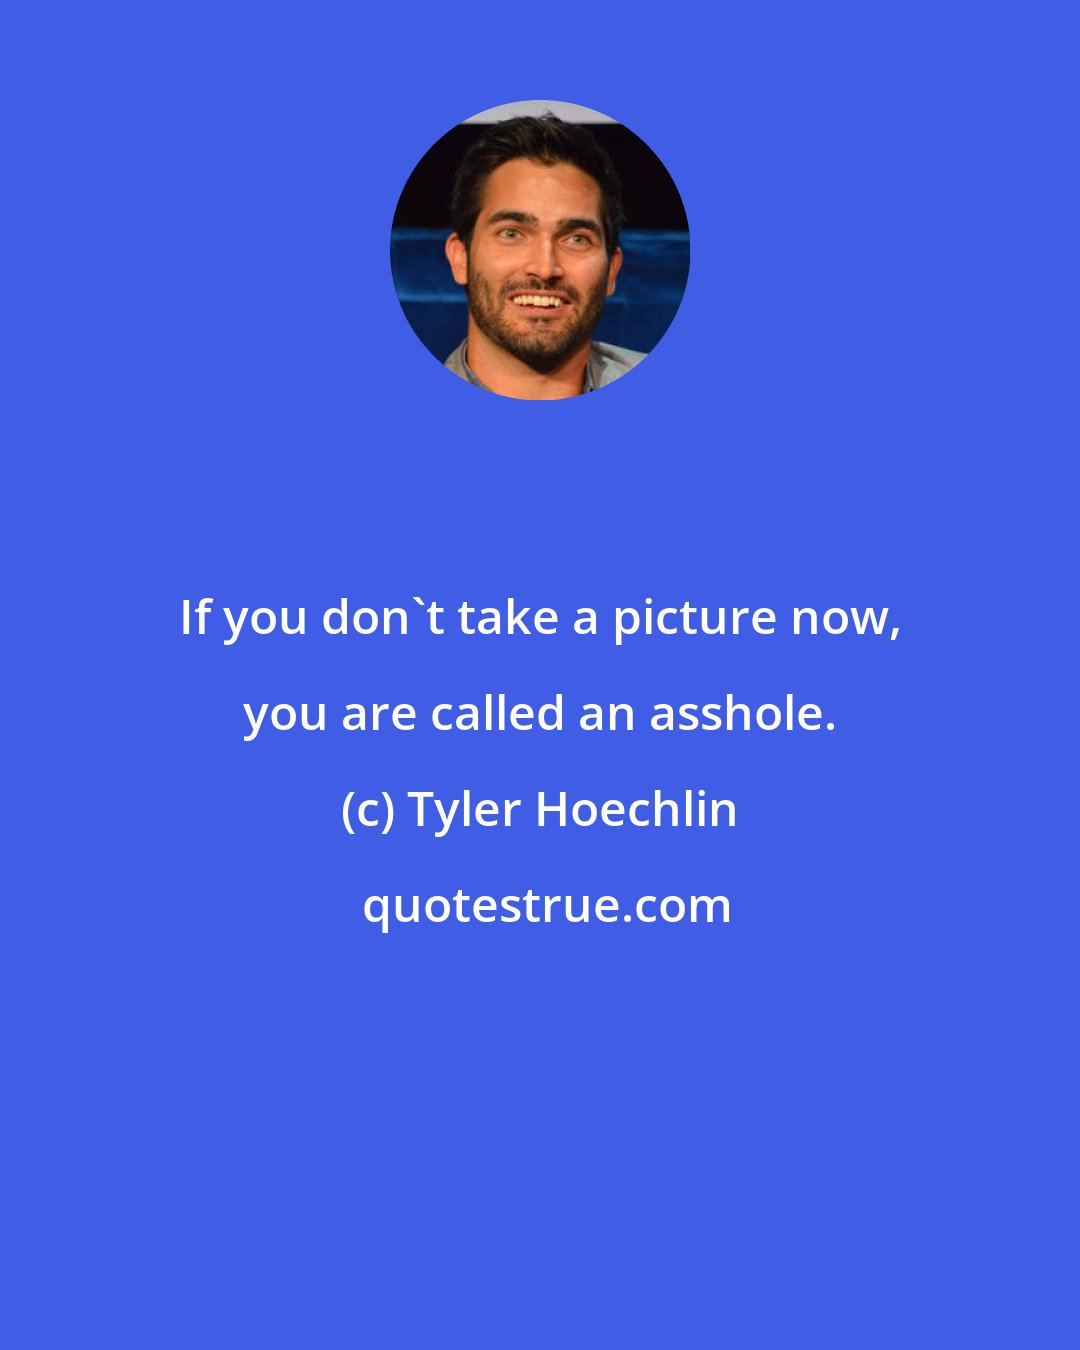 Tyler Hoechlin: If you don't take a picture now, you are called an asshole.